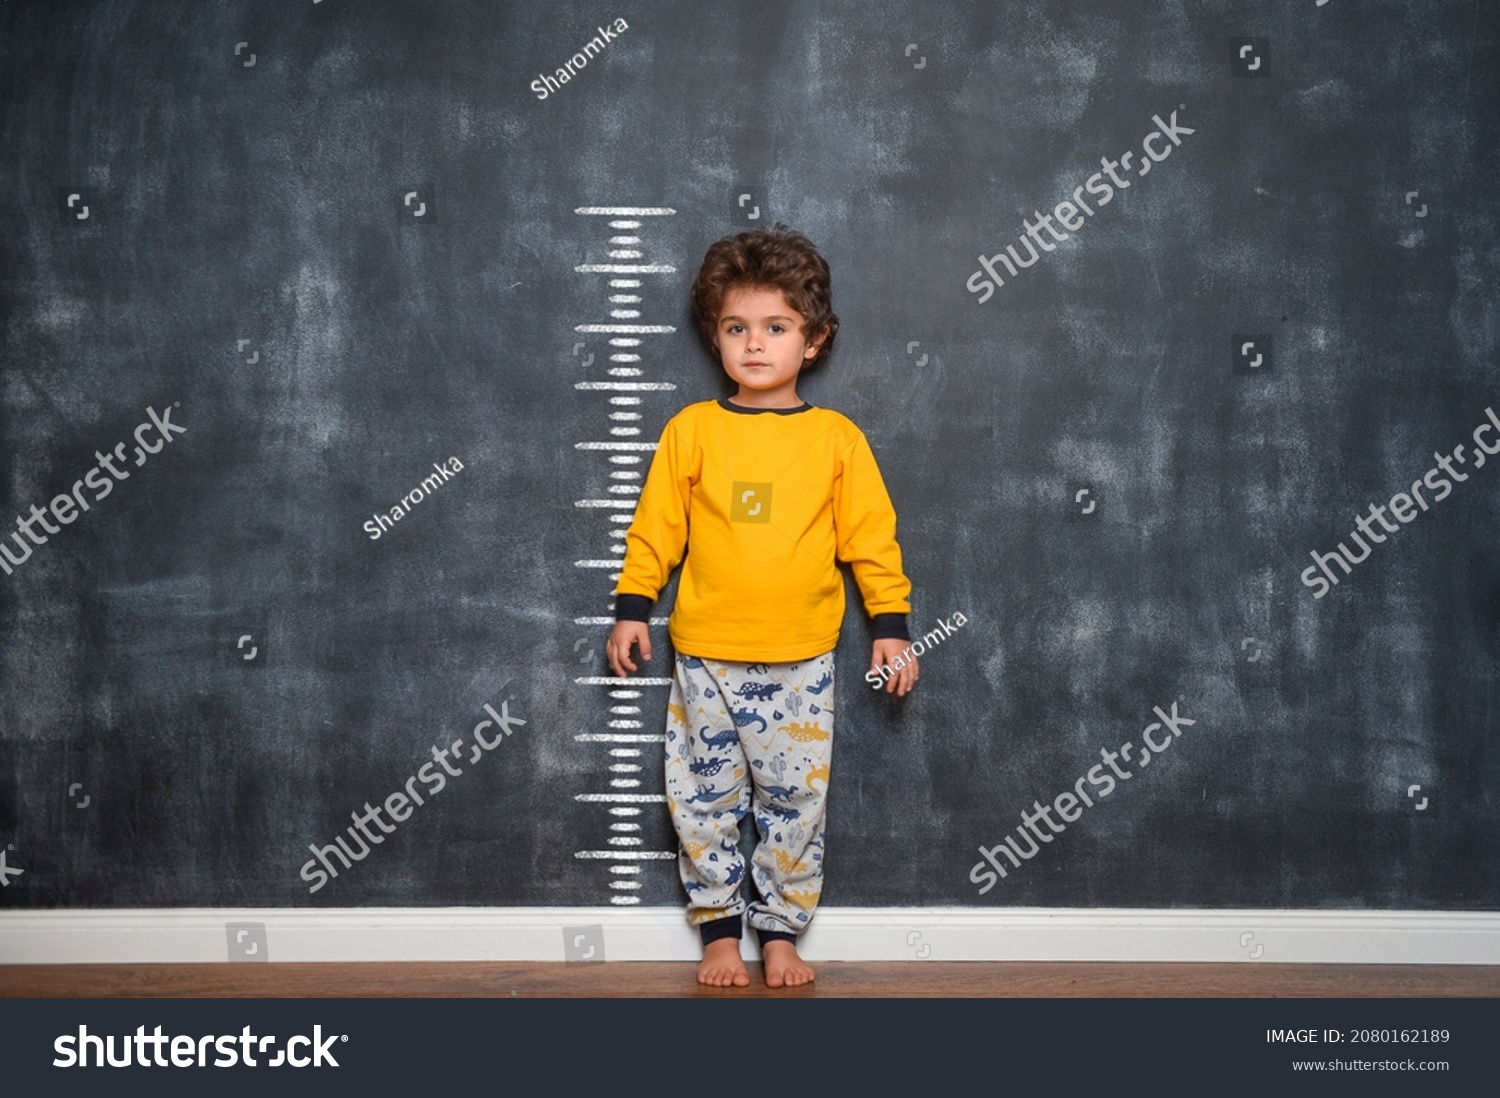 Funny smiling little child with measures of growth on blackboard wall beside him. Confident kid from kindergarten is ready to go to school. #2080162189